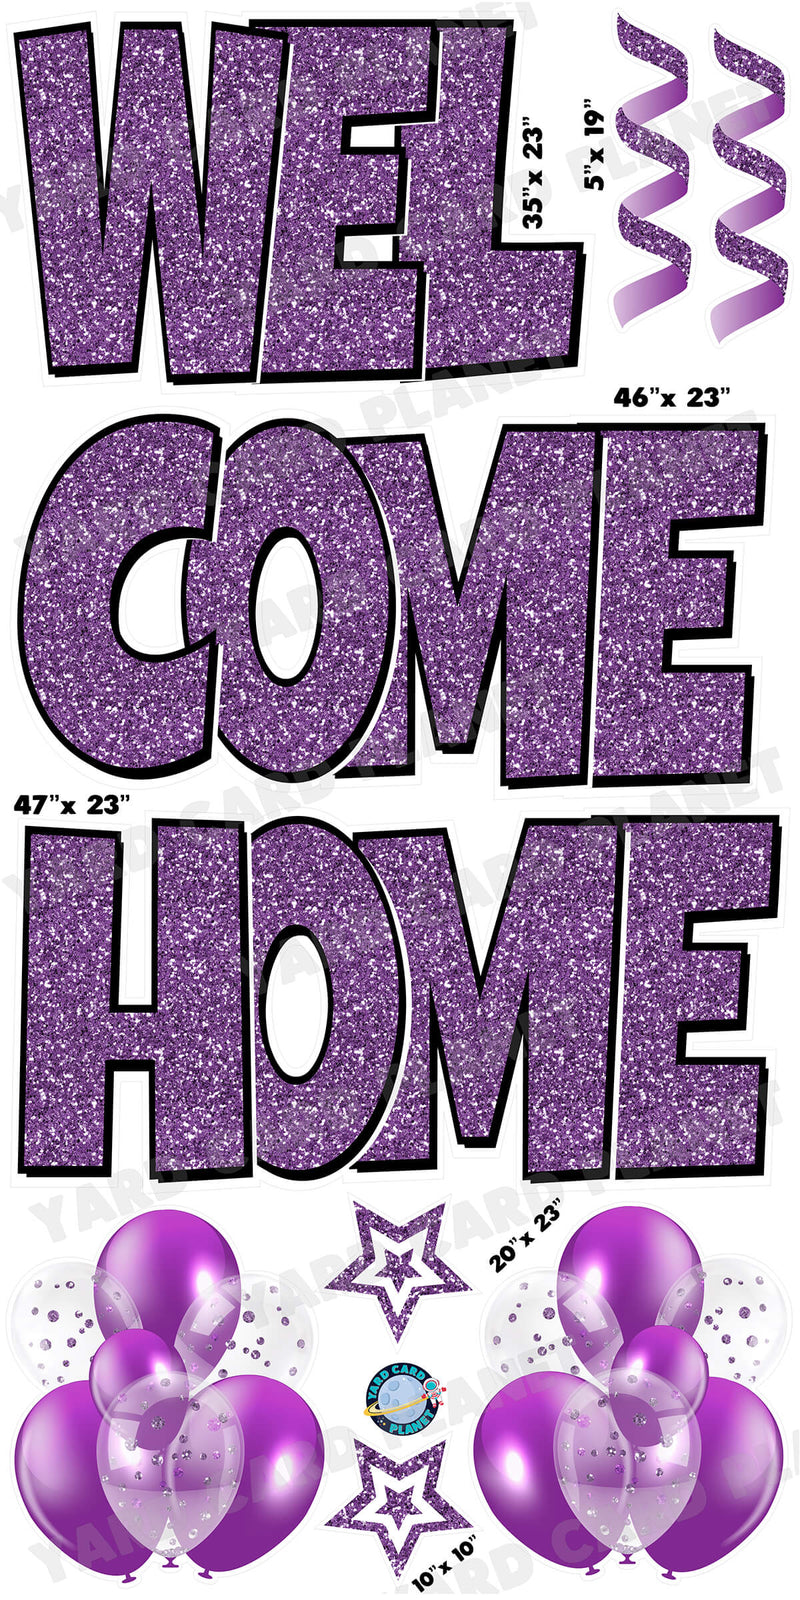 Large 23" Welcome Home Yard Card EZ Quick Sets in Luckiest Guy Font and Flair in Purple Glitter Pattern